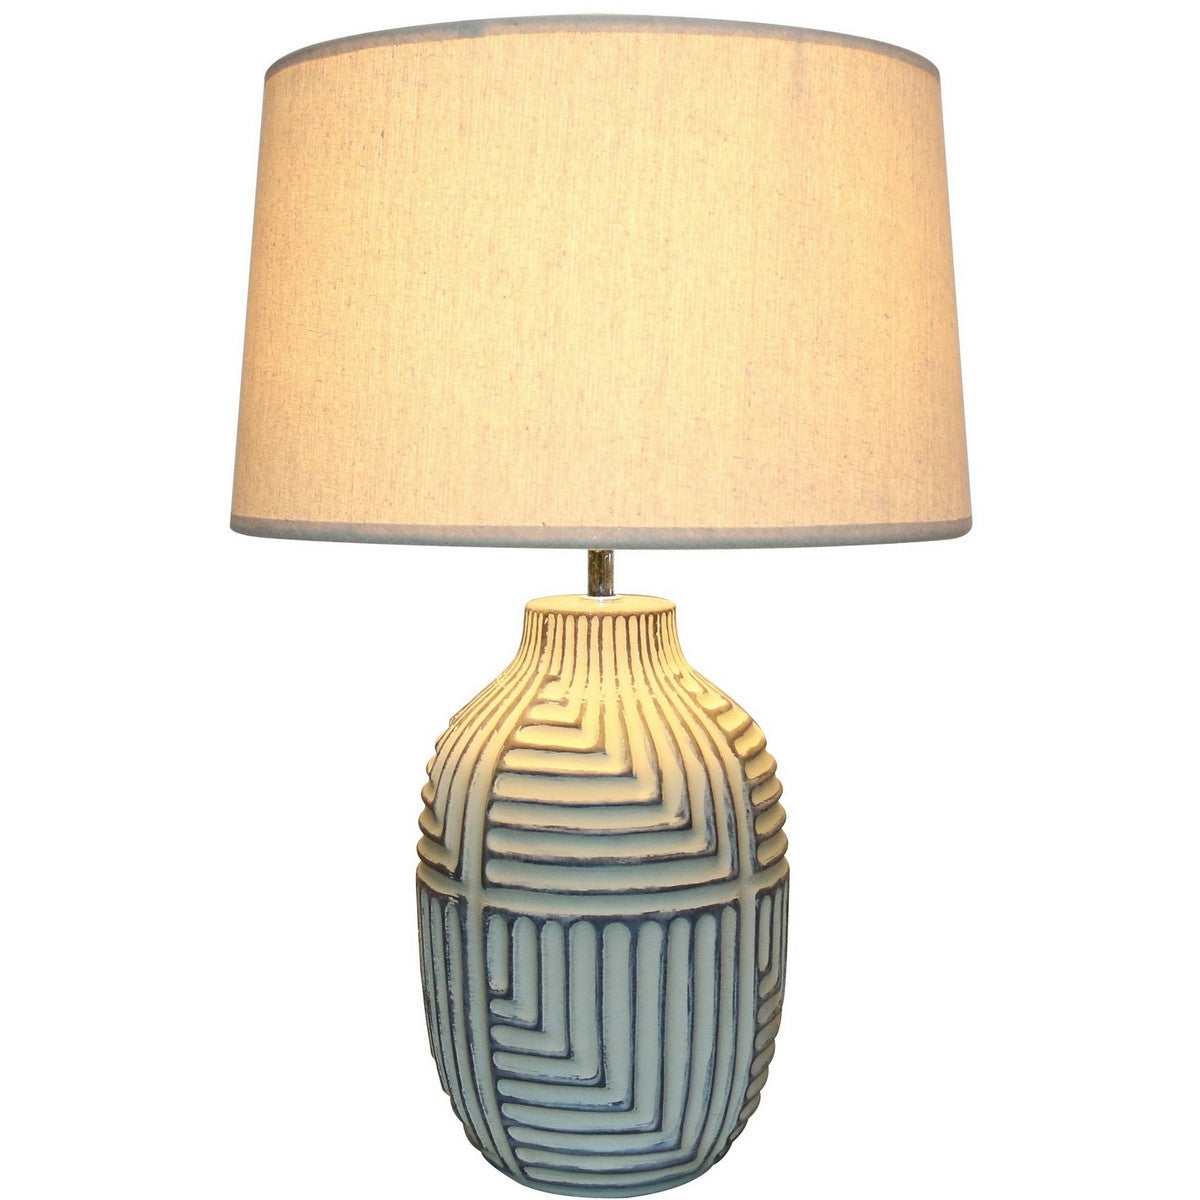 Aztec Lamp With Linen Shade